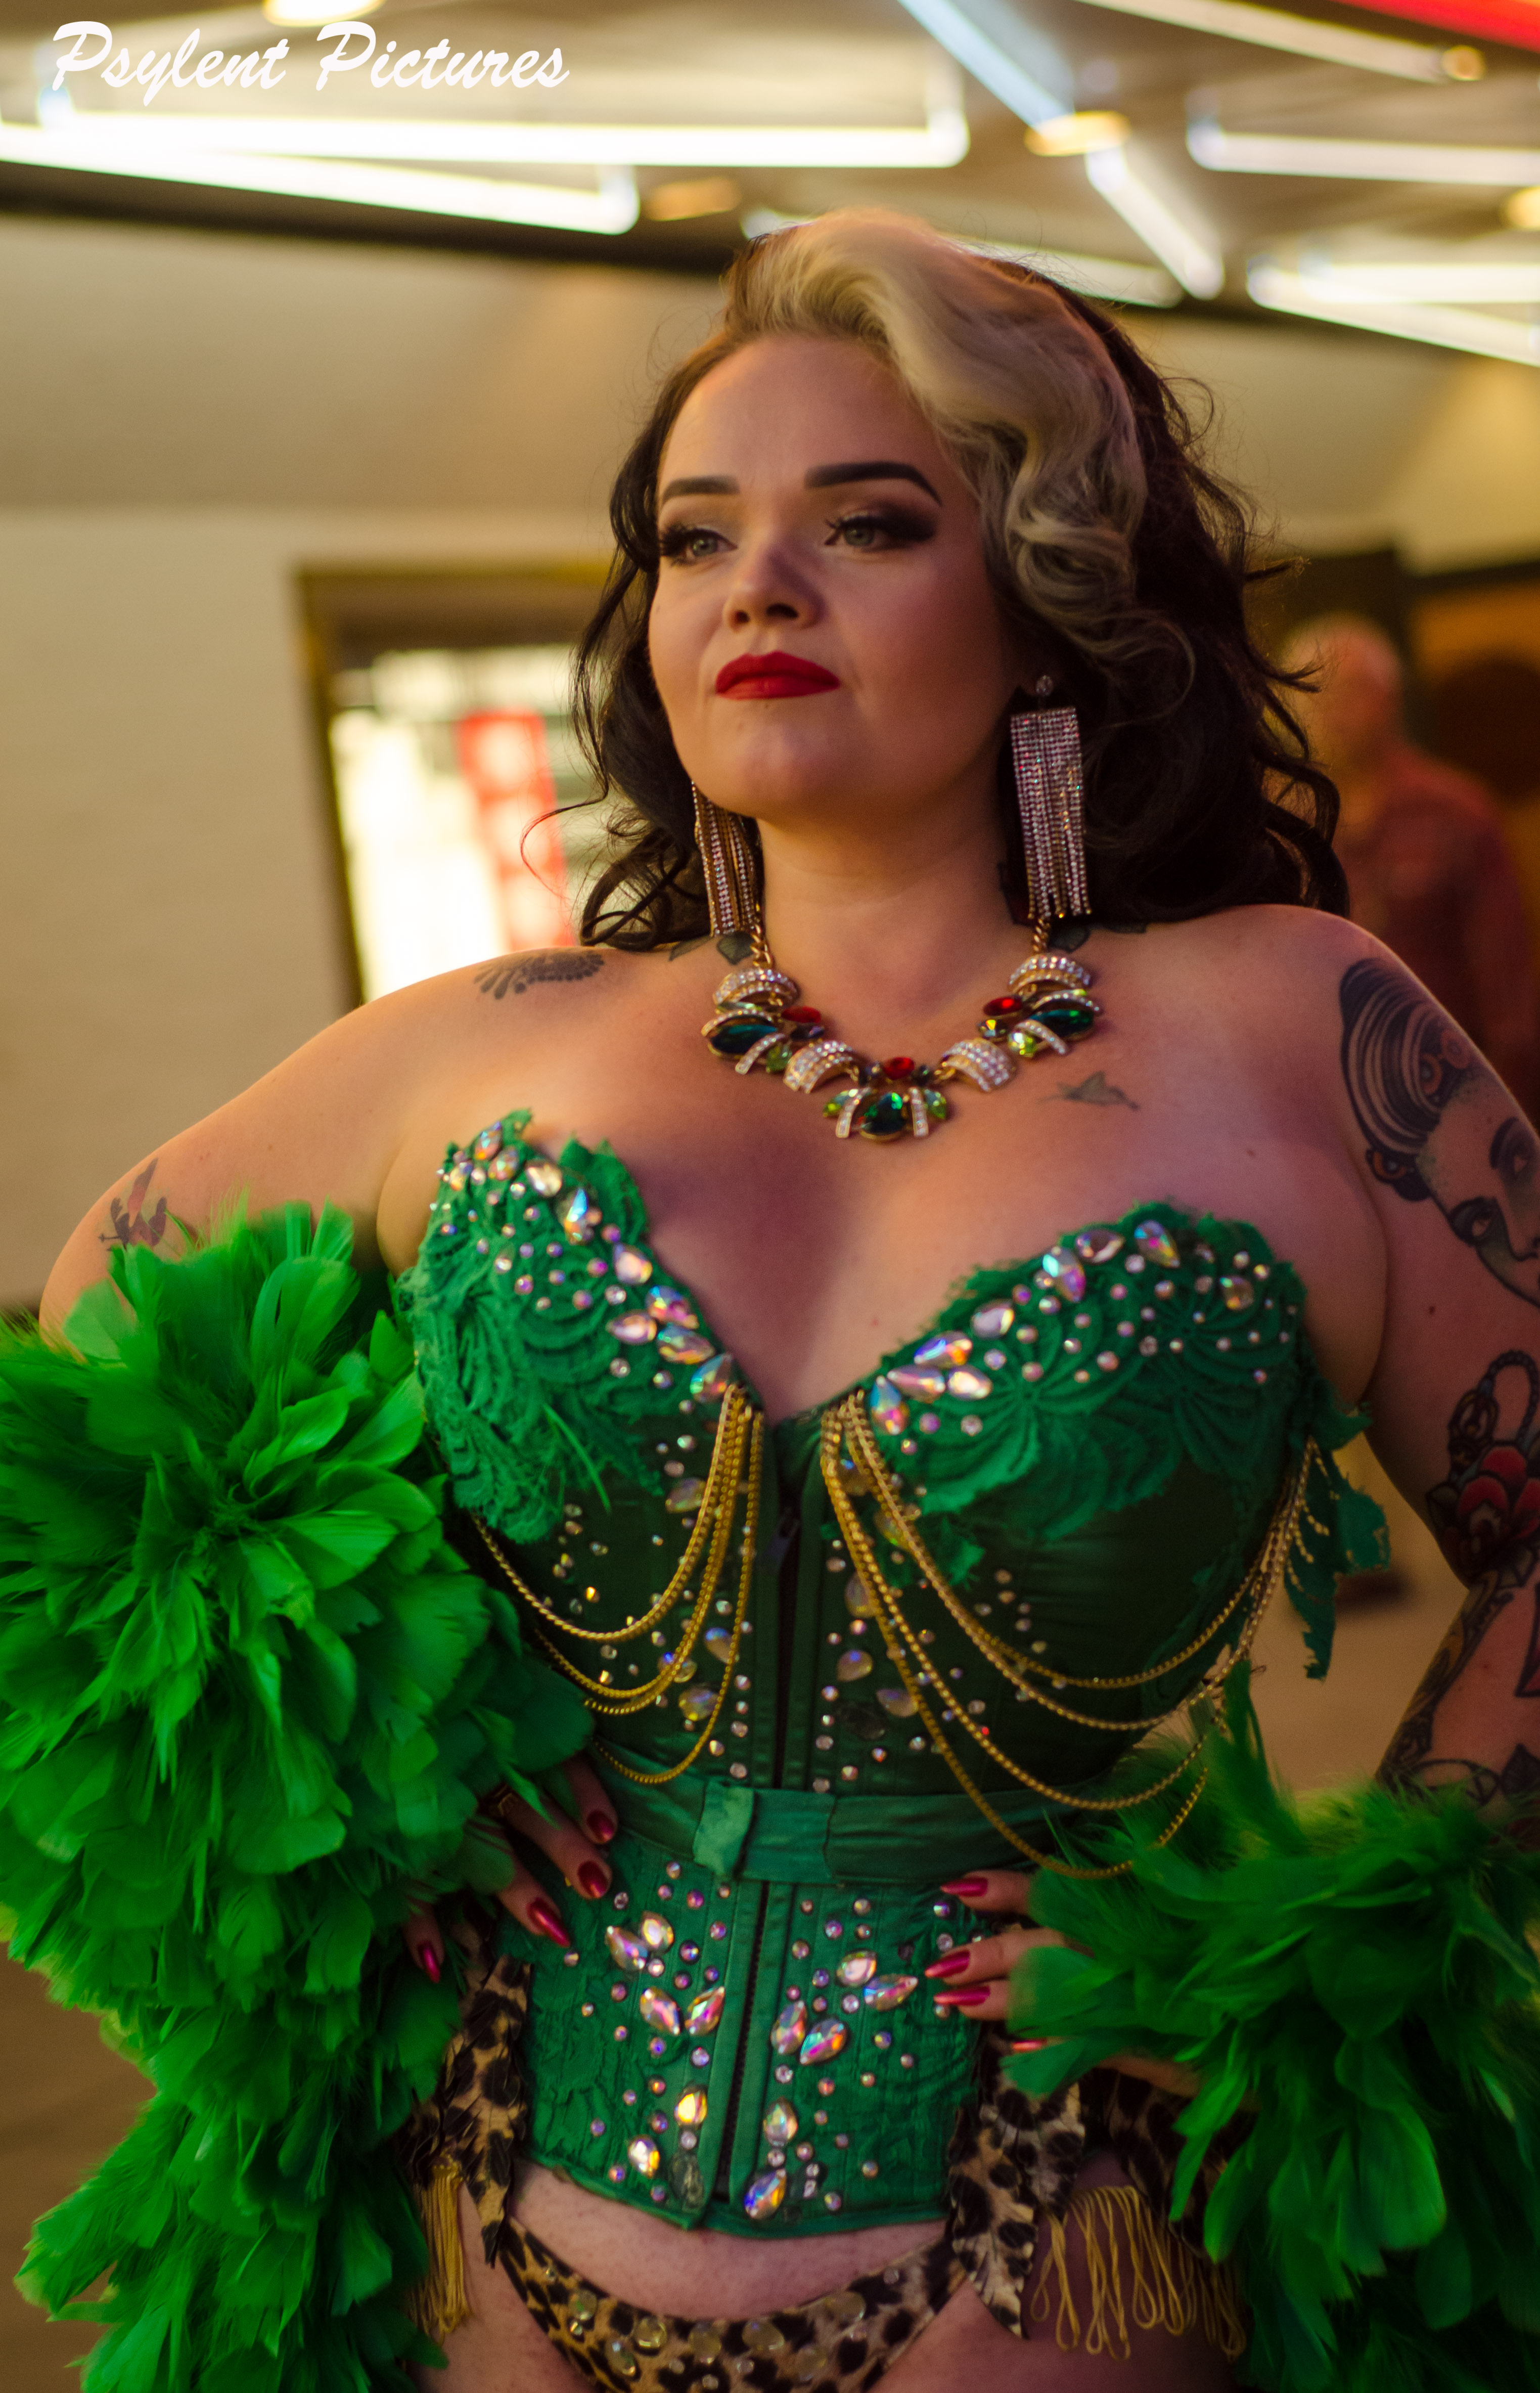 Molly with her arms on her waist wearing a bright colored corset looking in the mirror with a confident expression.